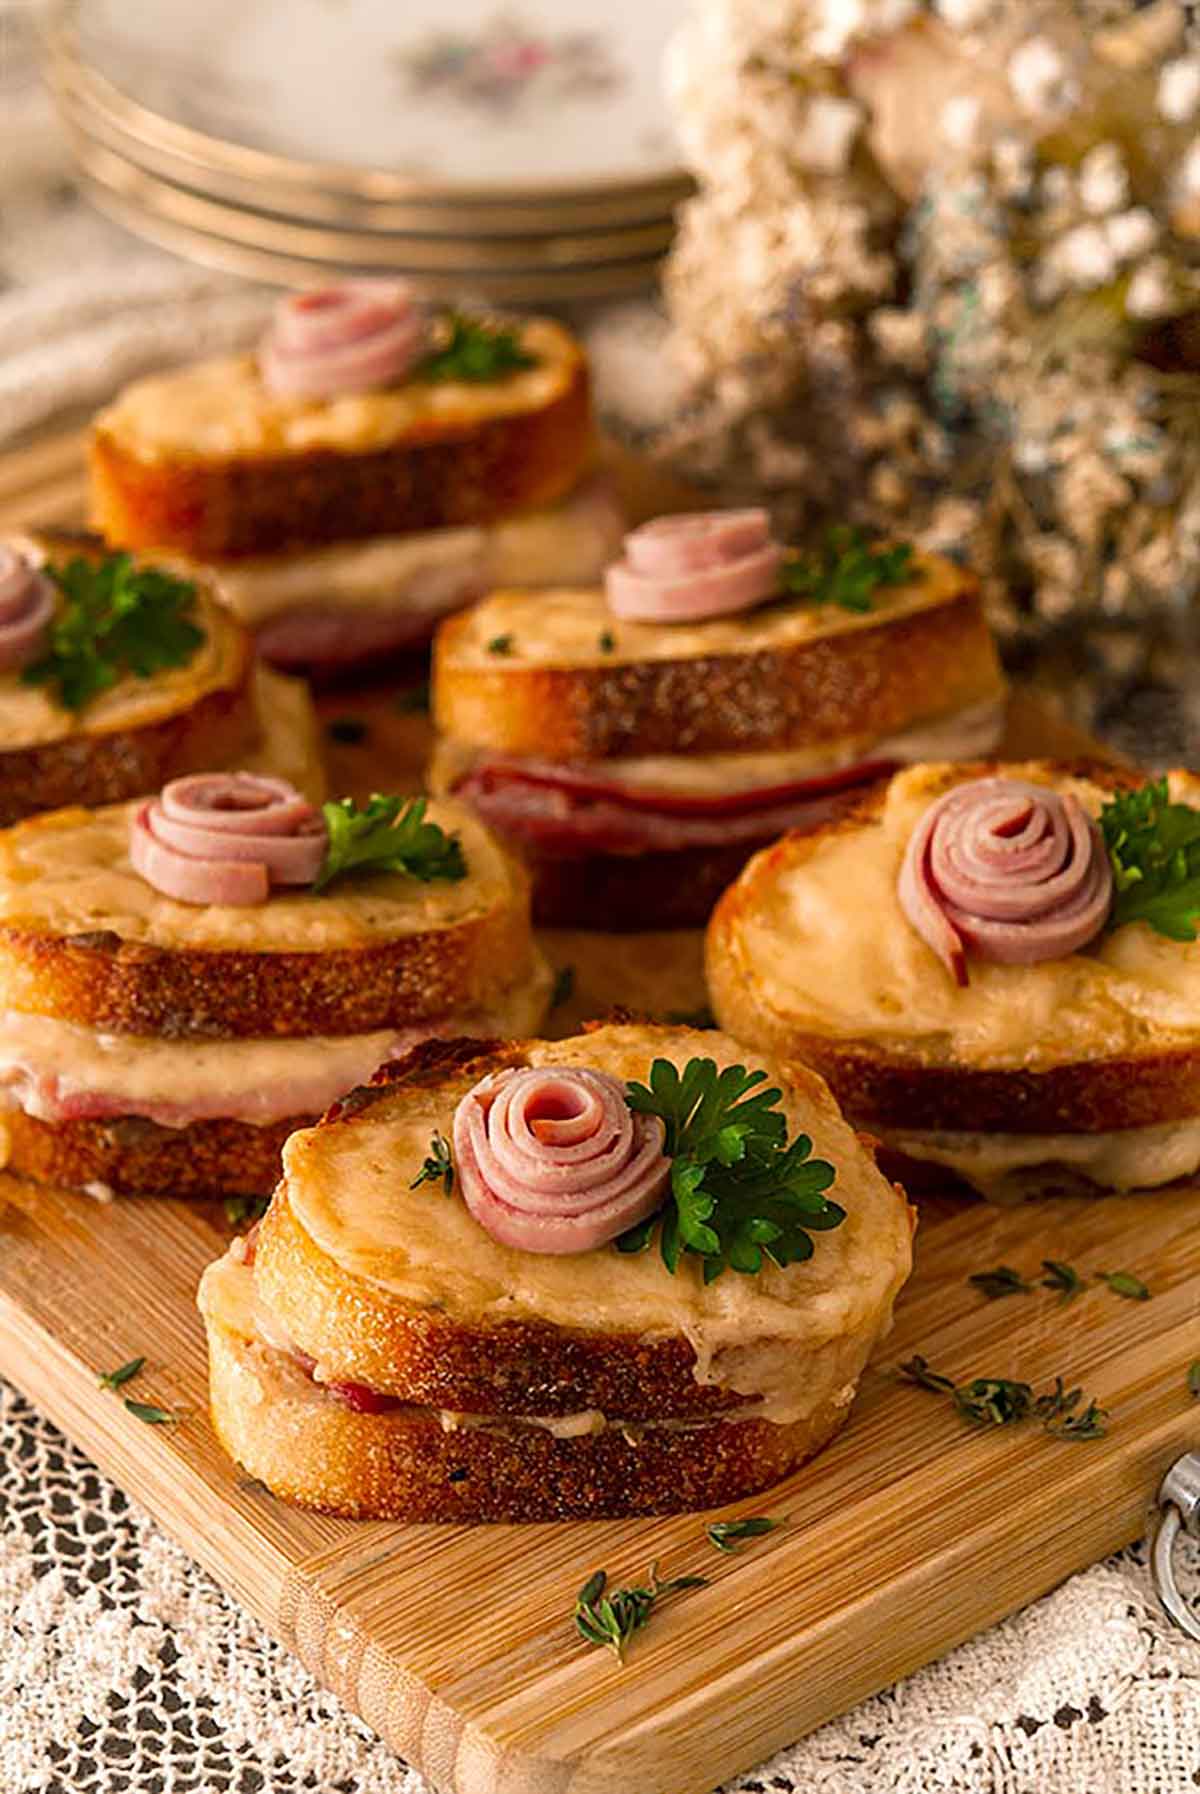 6 mini croque monsieur with a small ham rose garnishes and parsley on a wooden cutting board, surrounded by flowers.